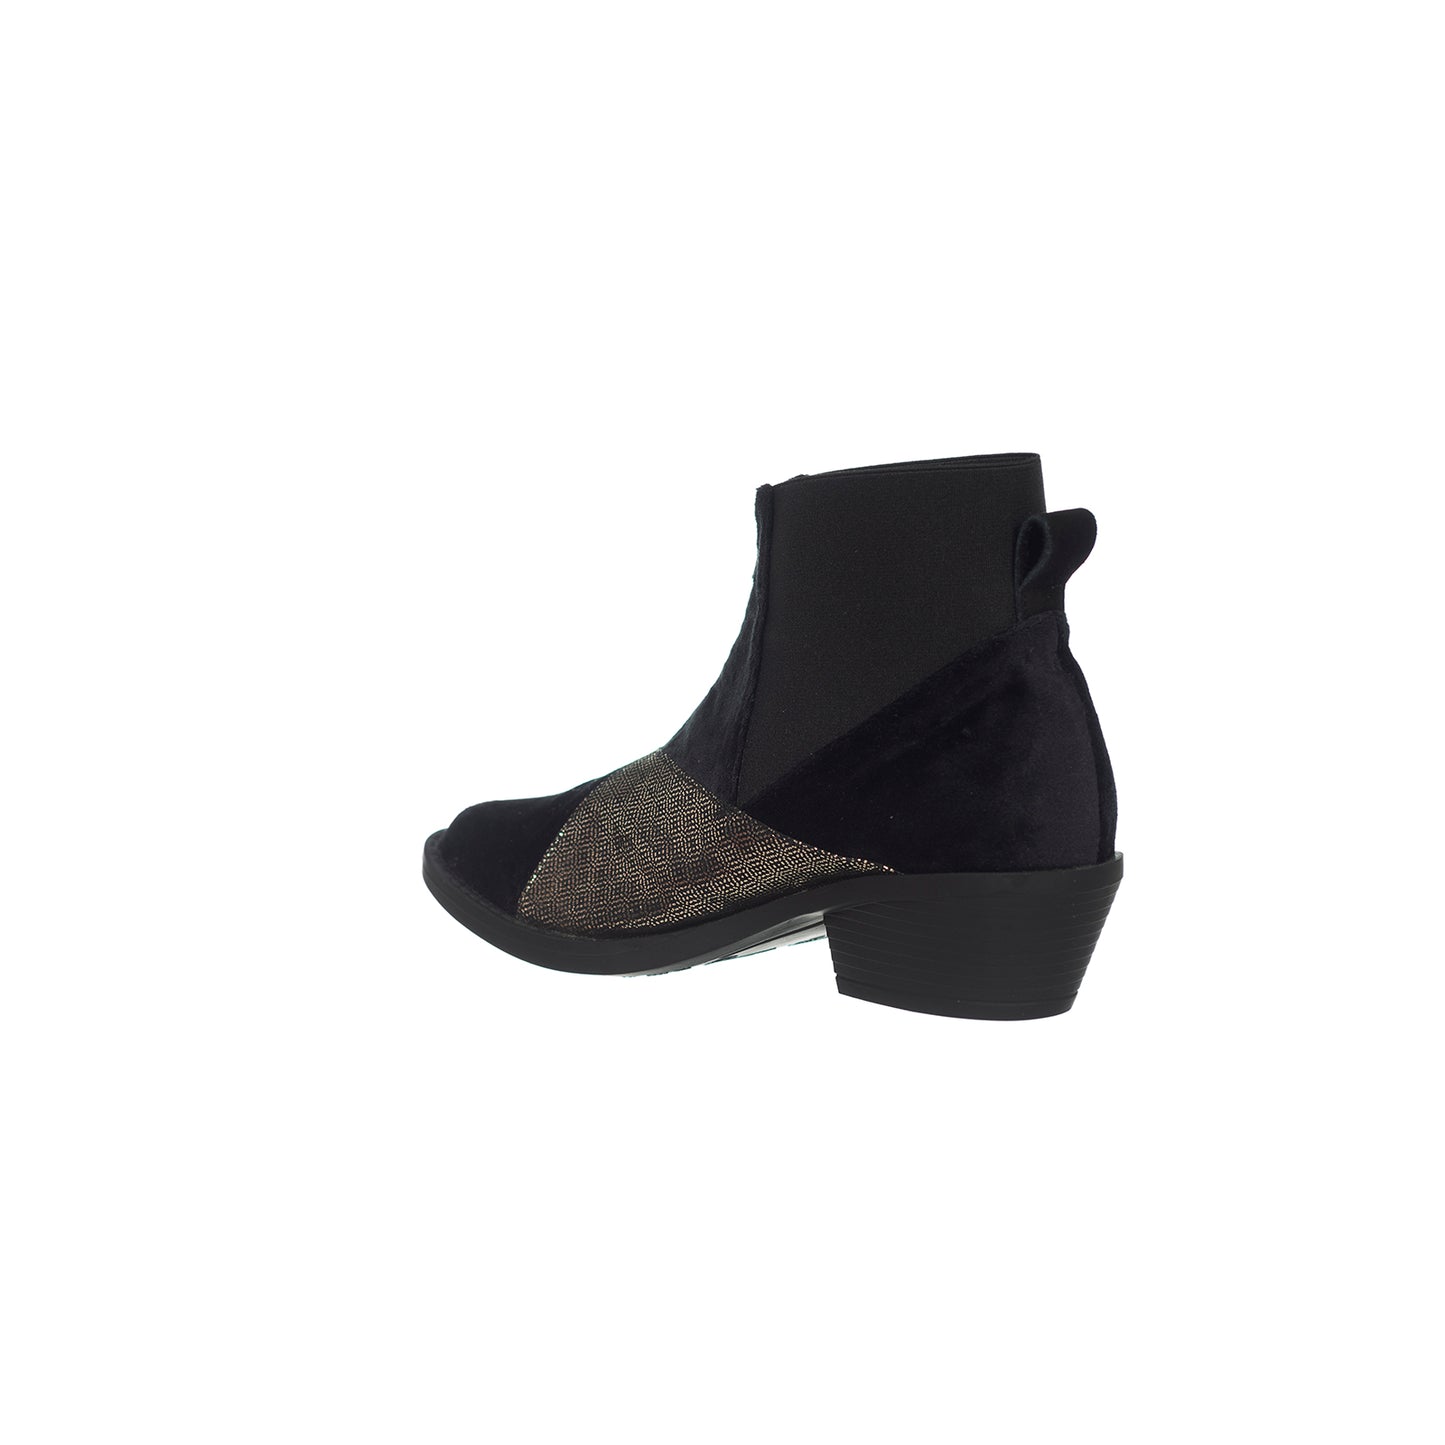 Papyrus ankle boots - Size 35